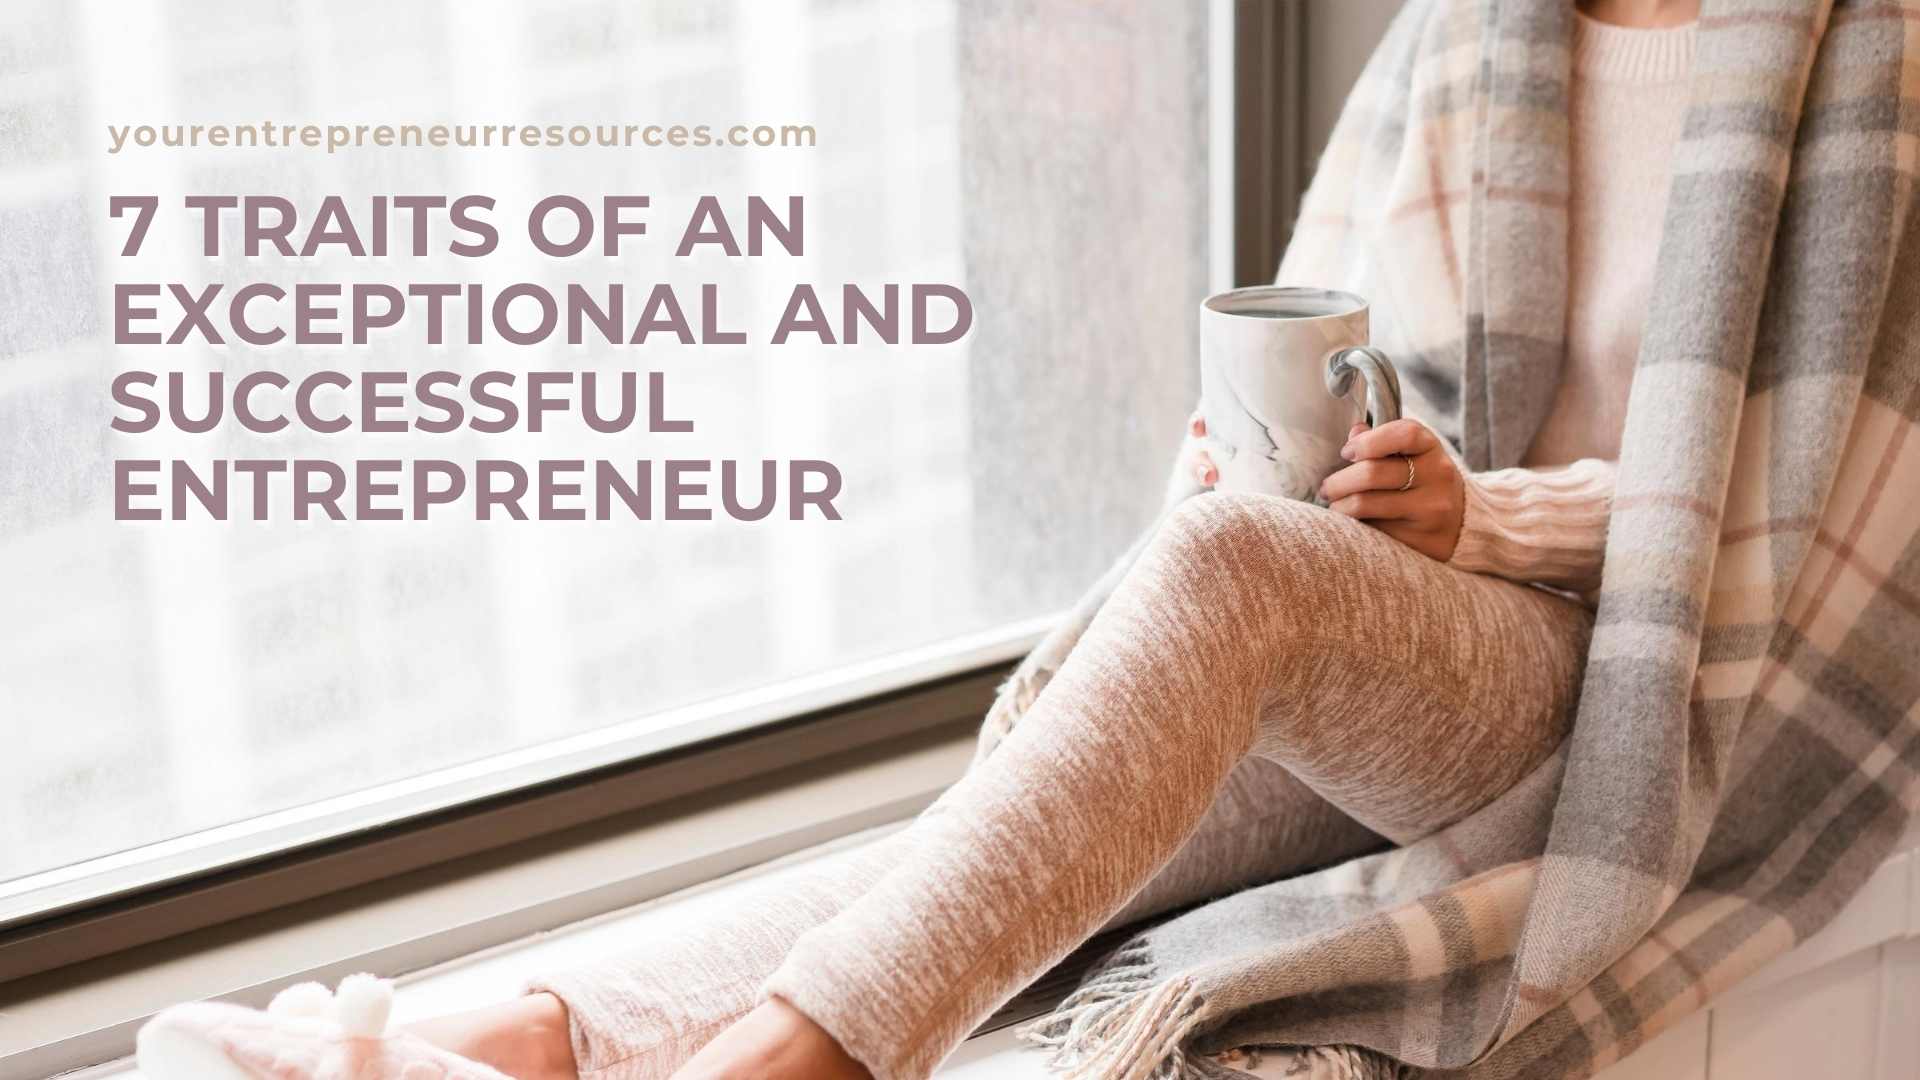 7 traits of an Exceptional and Successful Entrepreneur